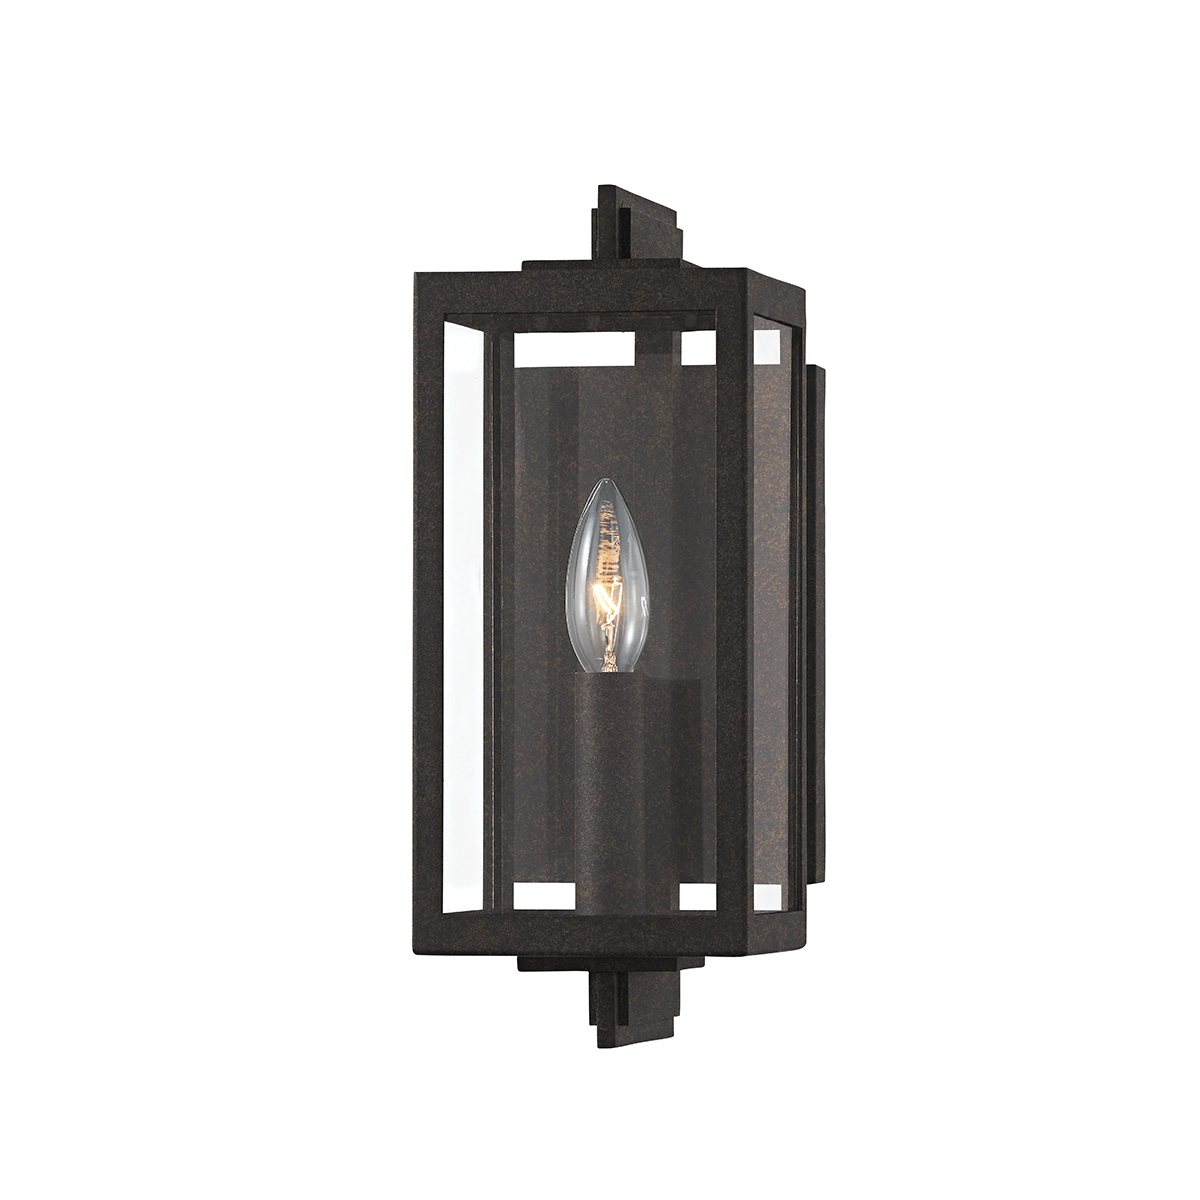 Troy NICO 1 LIGHT EXTERIOR WALL SCONCE B5511 Outdoor l Wall Troy Lighting FRENCH IRON  